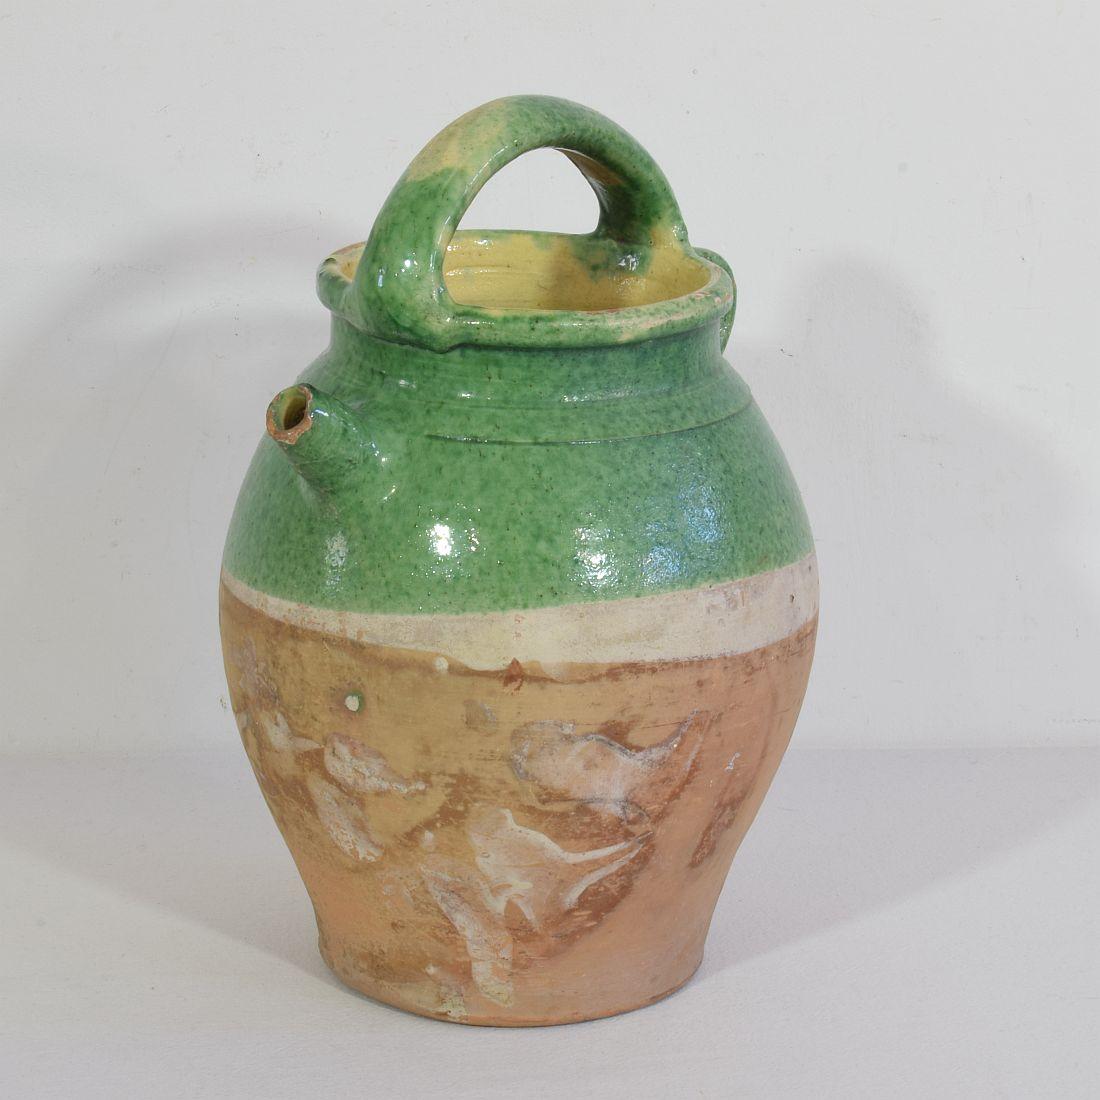 Great authentic piece of pottery from the Provence. Unique and rare glaze. Beautiful weathered. Chips and imperfections help authenticate this water cruche as it was a utilitarian type piece,
France, circa 1850-1900
Good condition.